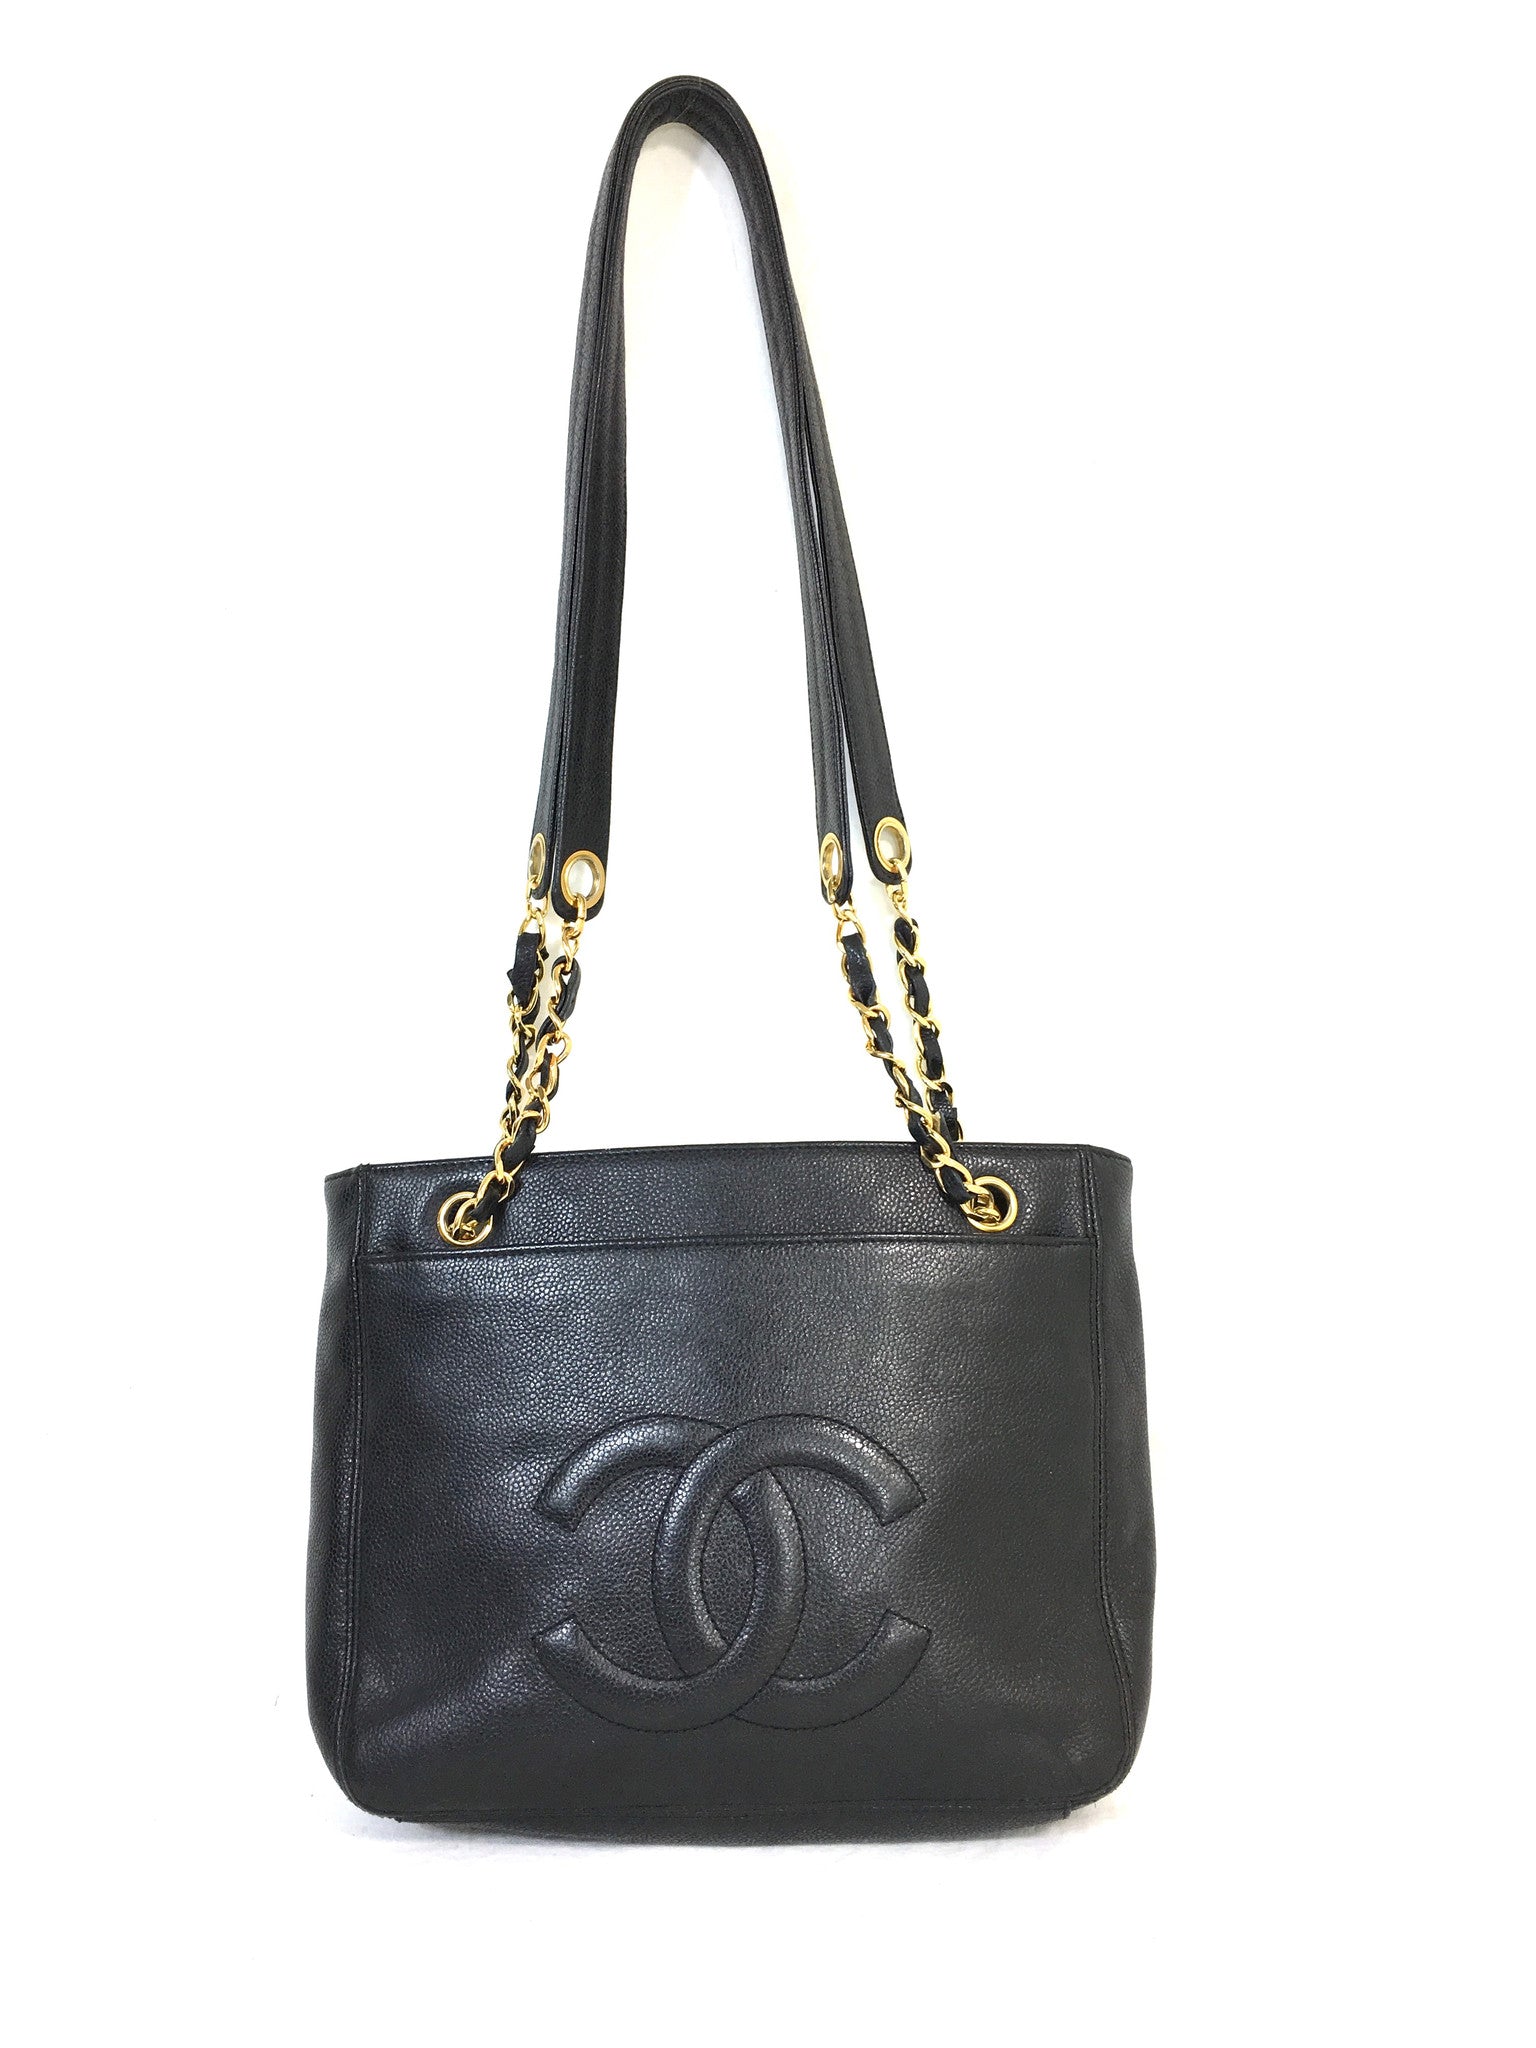 CHANEL Caviar Black Timeless CC Two-Sided Chain Shoulder Bag